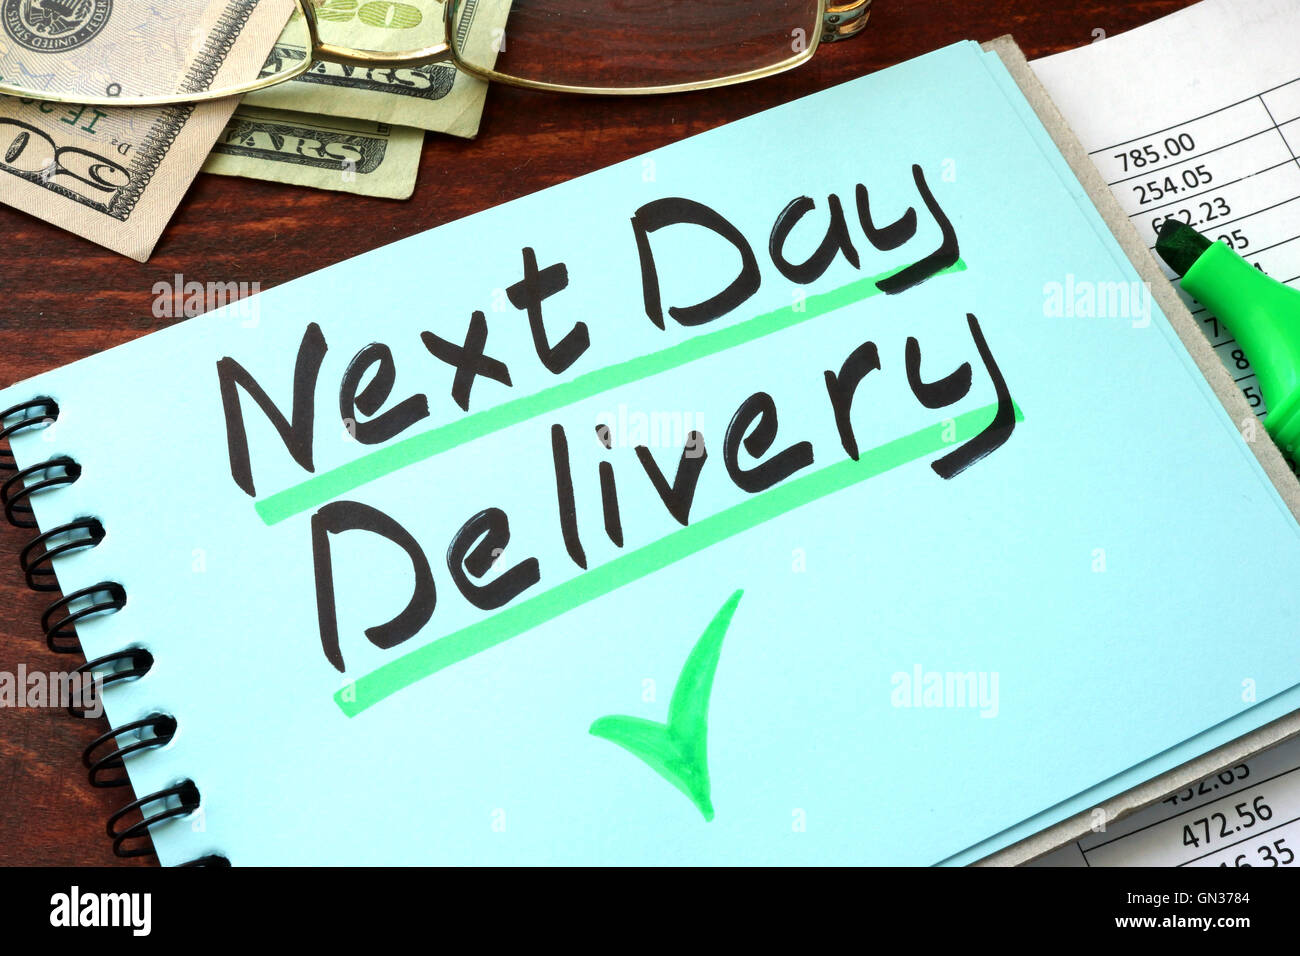 Next day delivery written on a notepad with marker. Stock Photo